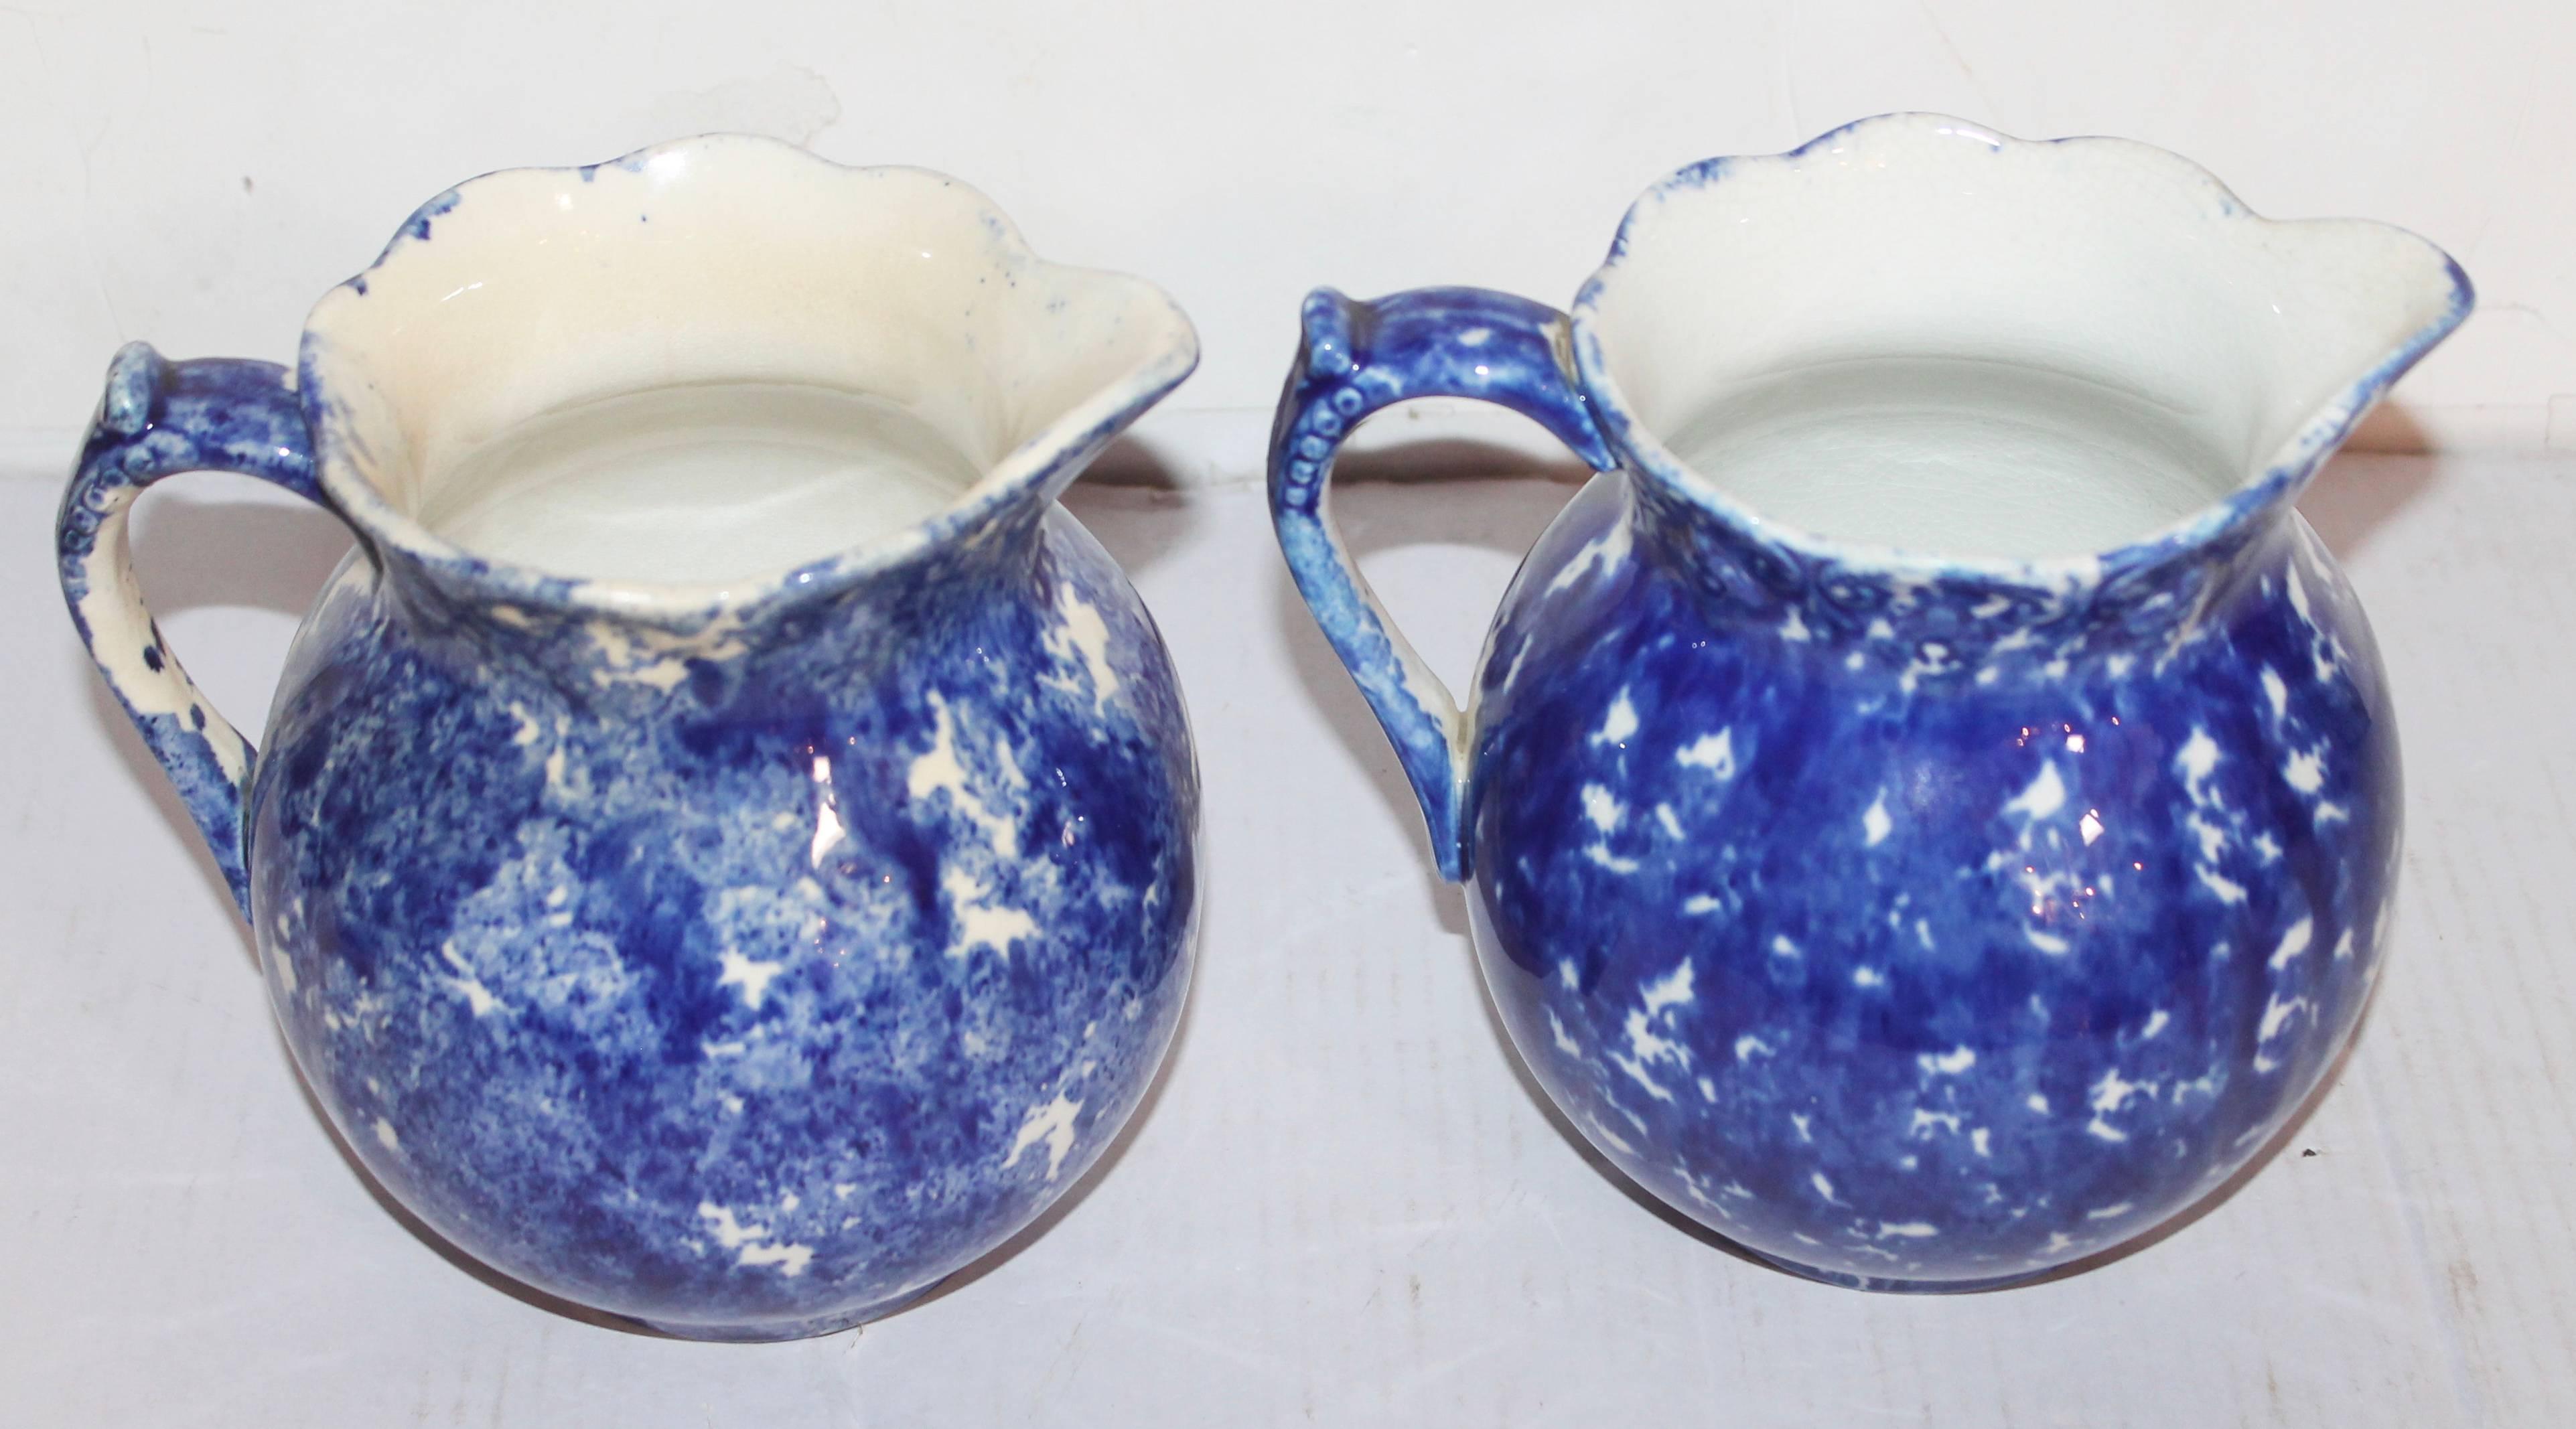 Two 19th century American sponge ware pottery pitchers are in good condition. These wonderful hand-painted glazed pitchers have a handmade look.